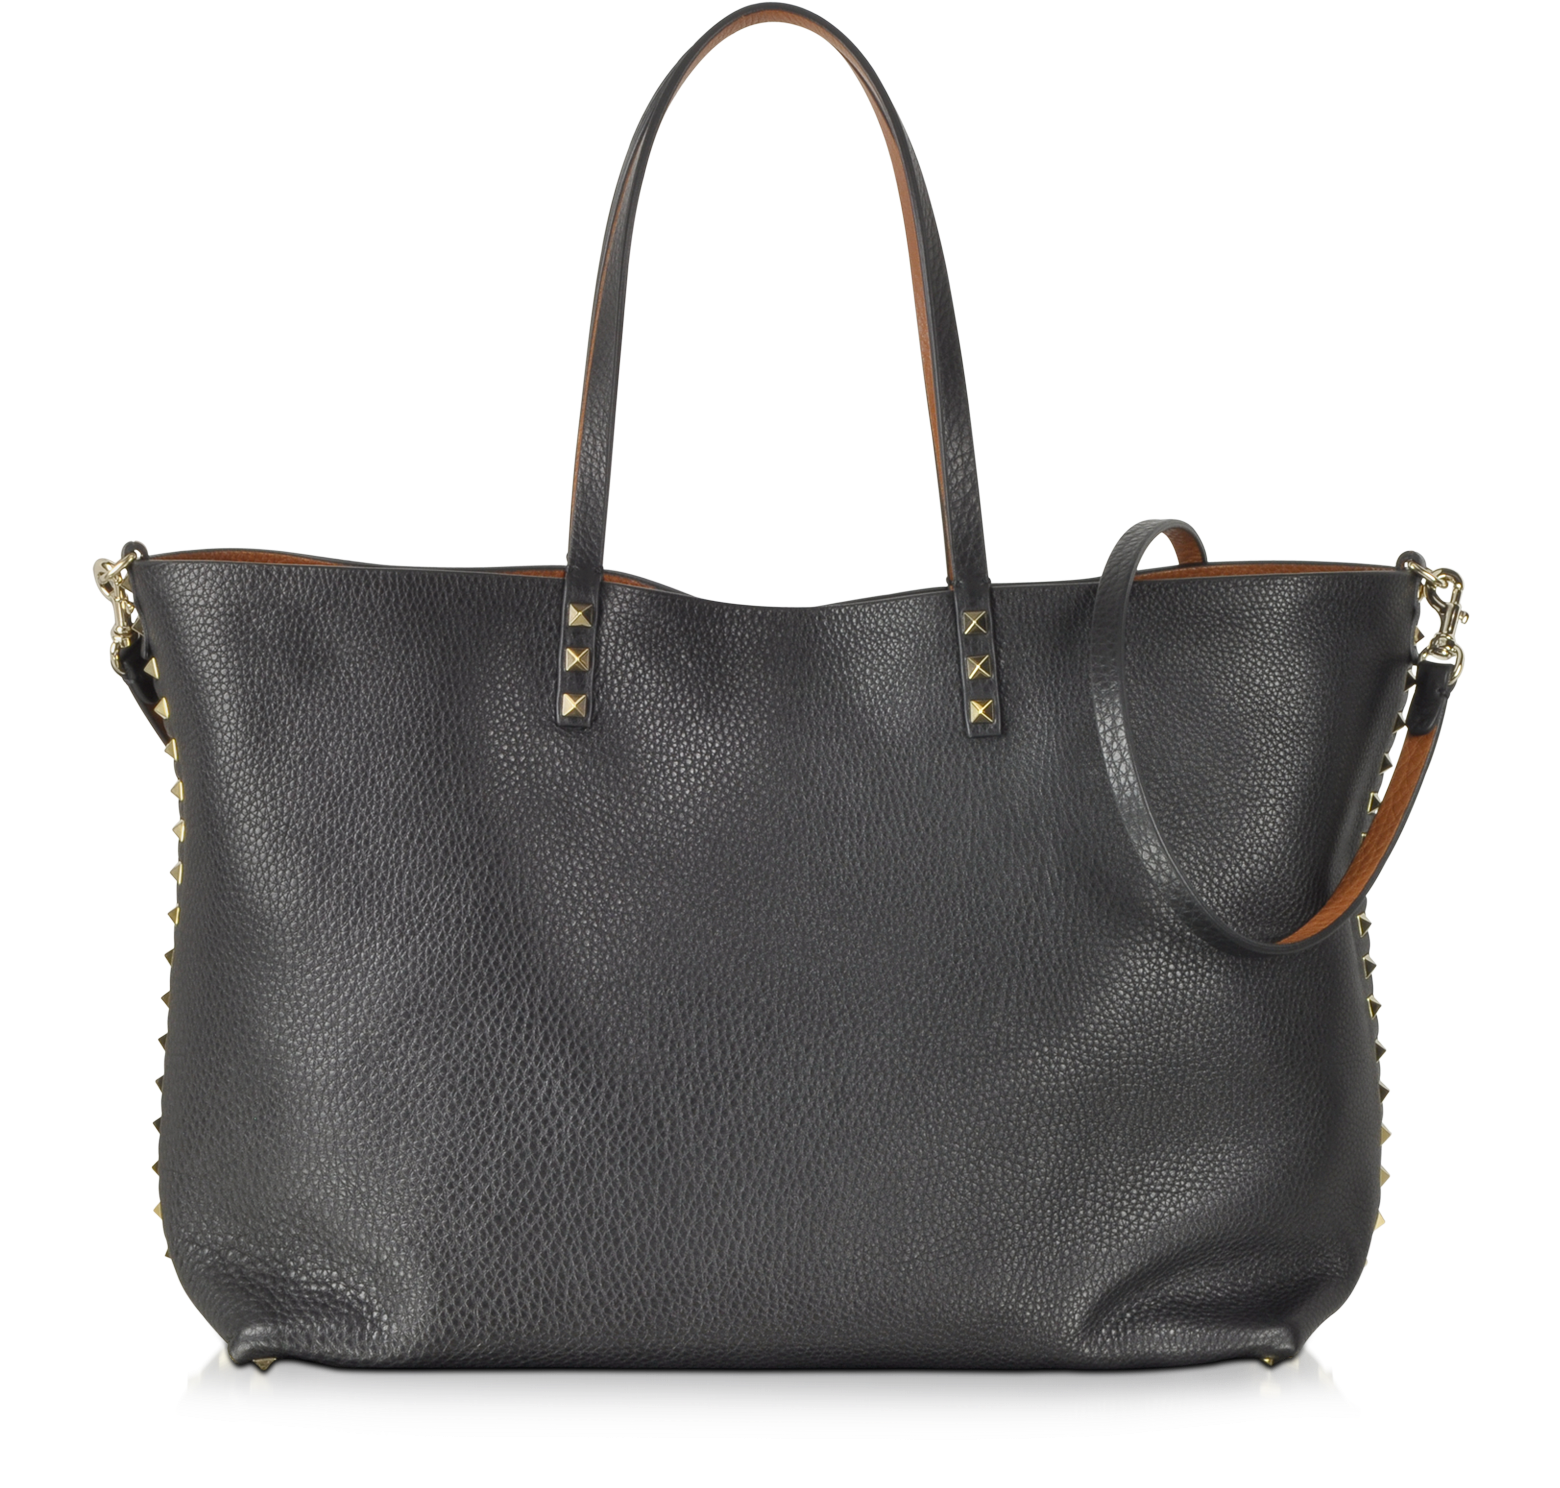 Valentino Rockstud Double Leather Tote at FORZIERI